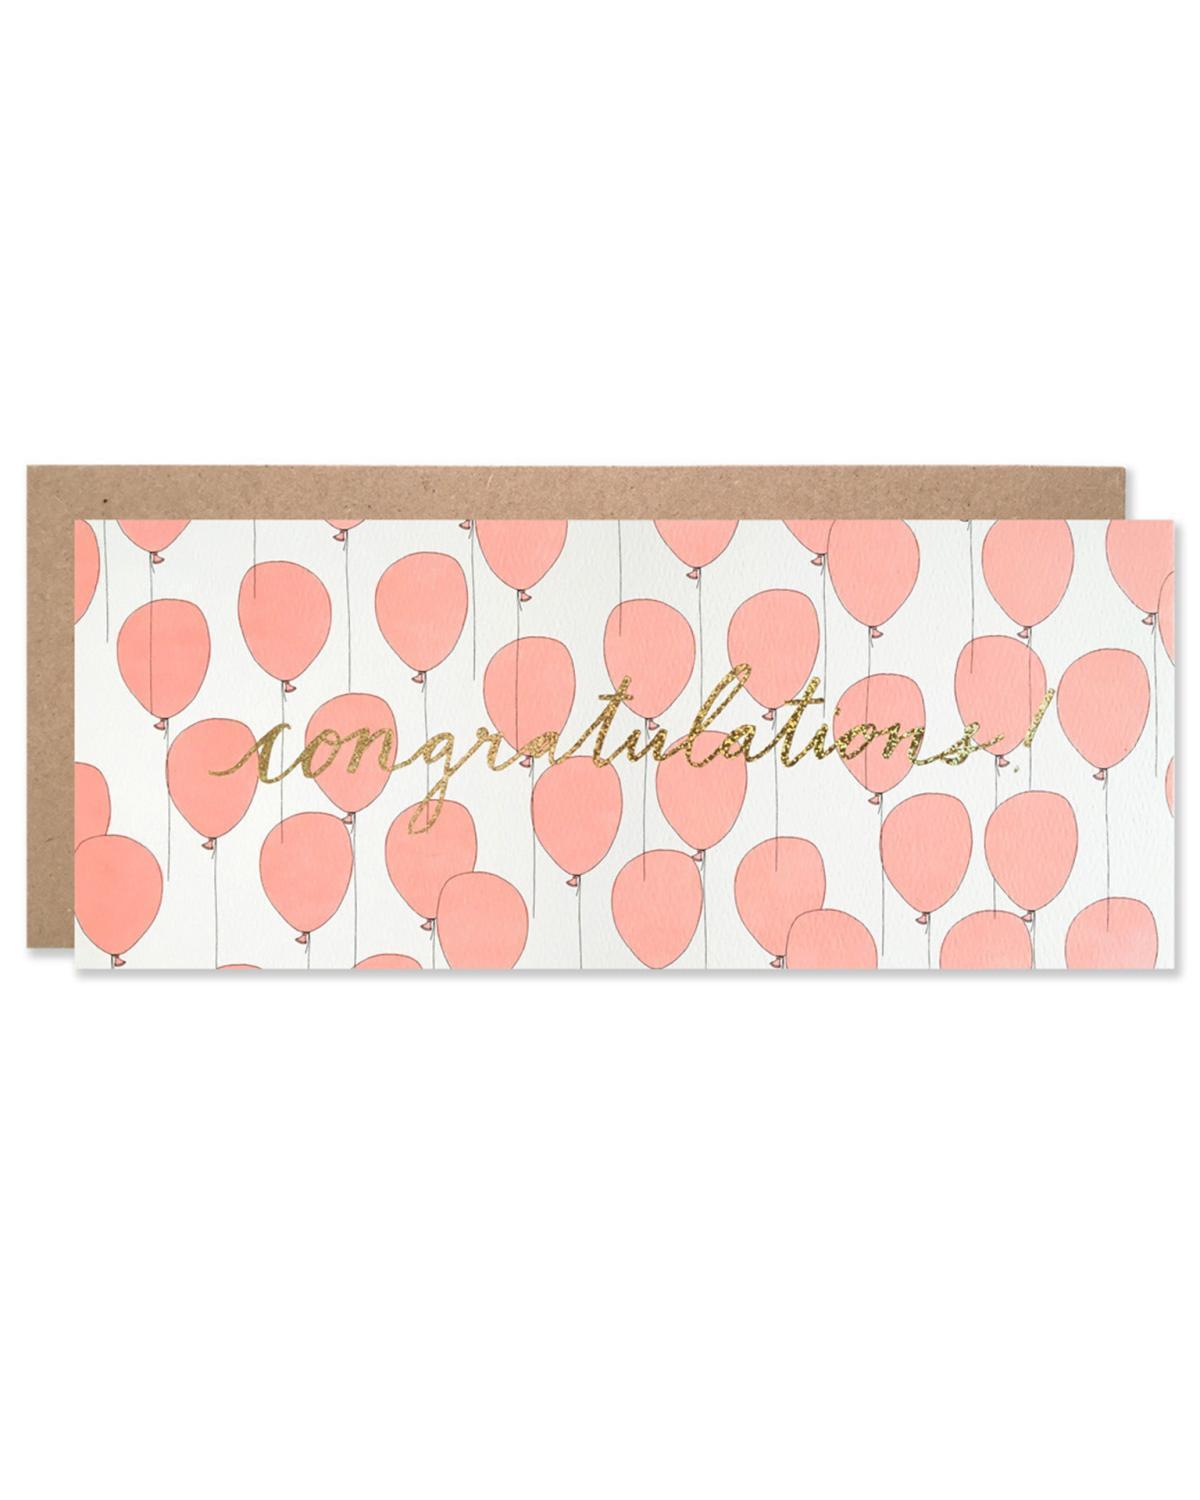 Little hartland brooklyn paper+party Congratulations Balloons with Gold Glitter Foil